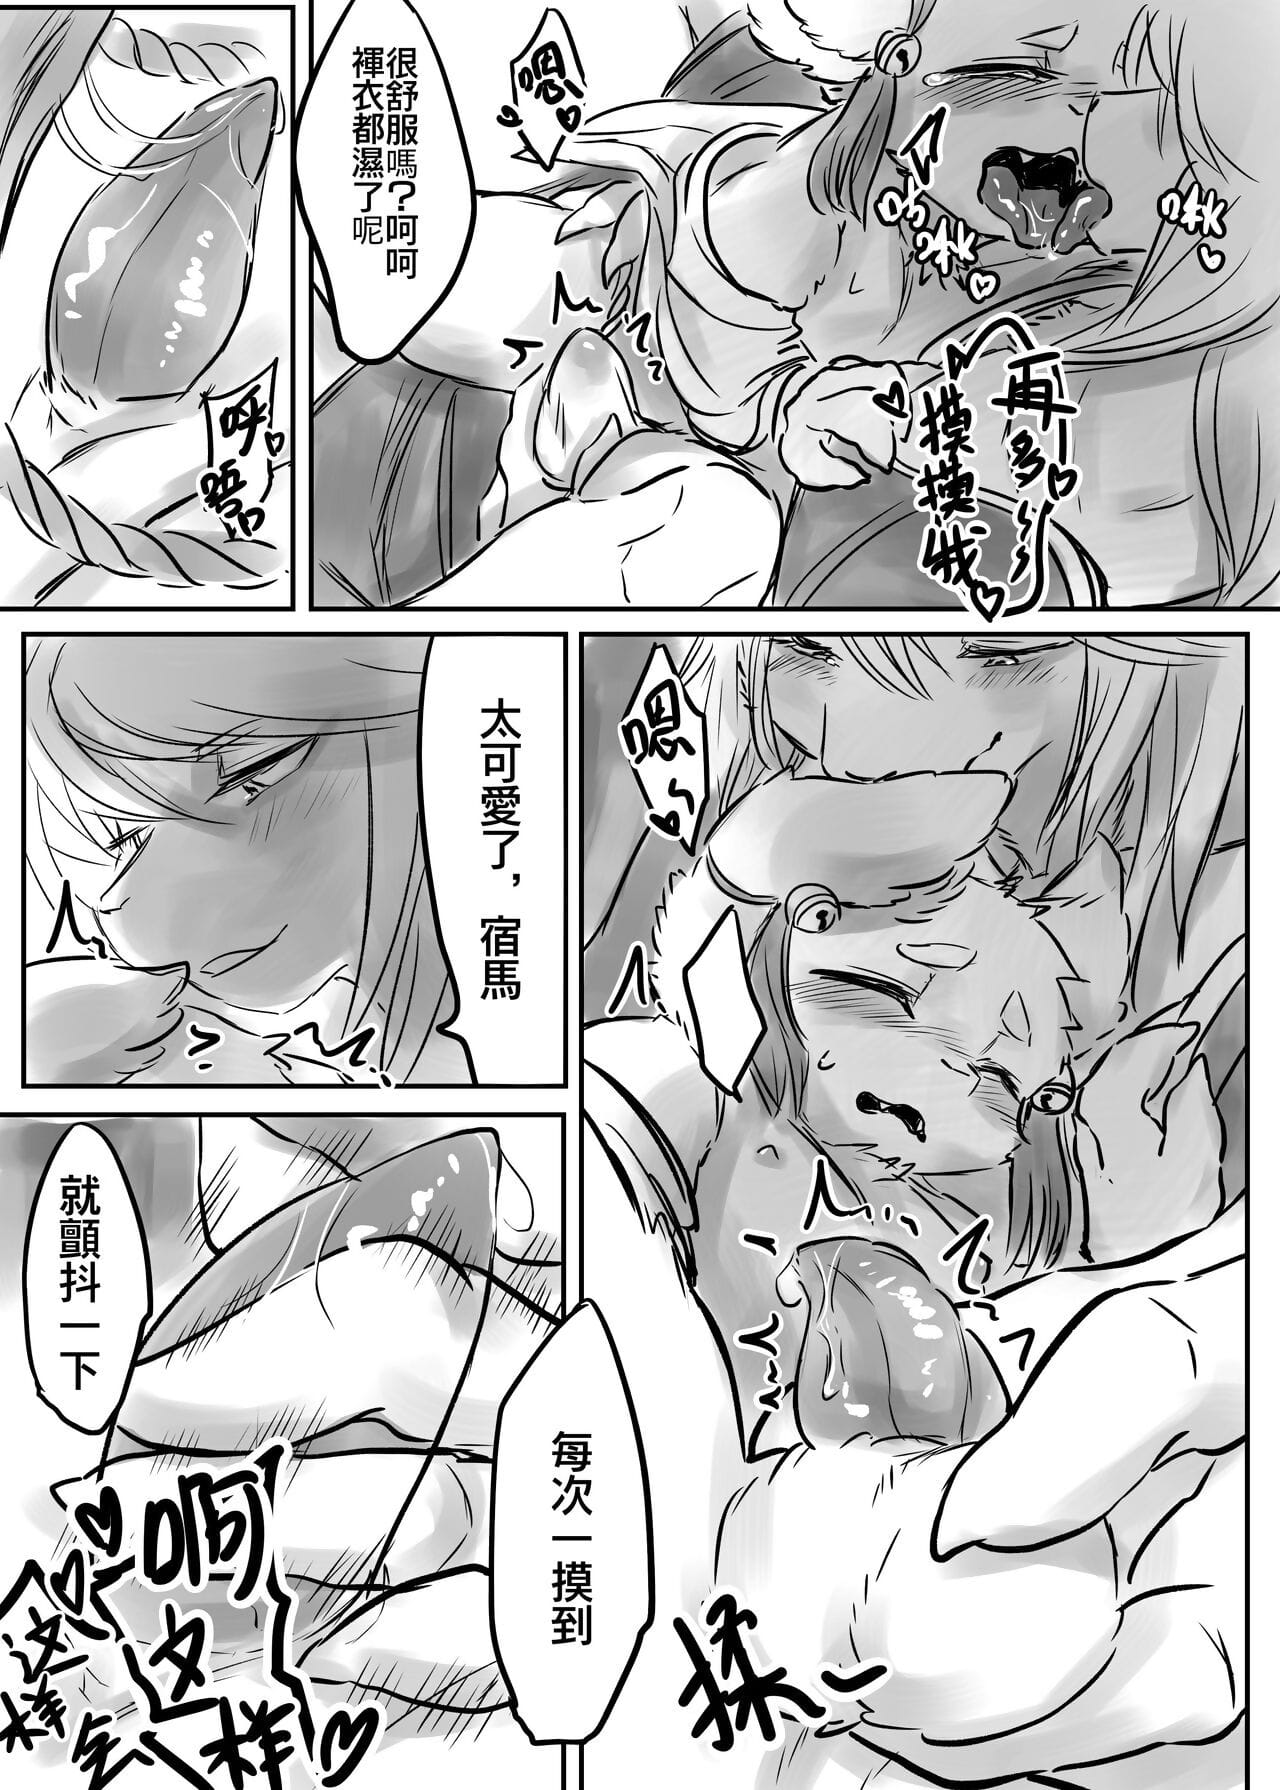 （the Besucher 他乡之人 by：鬼流 Teil 3 page 1